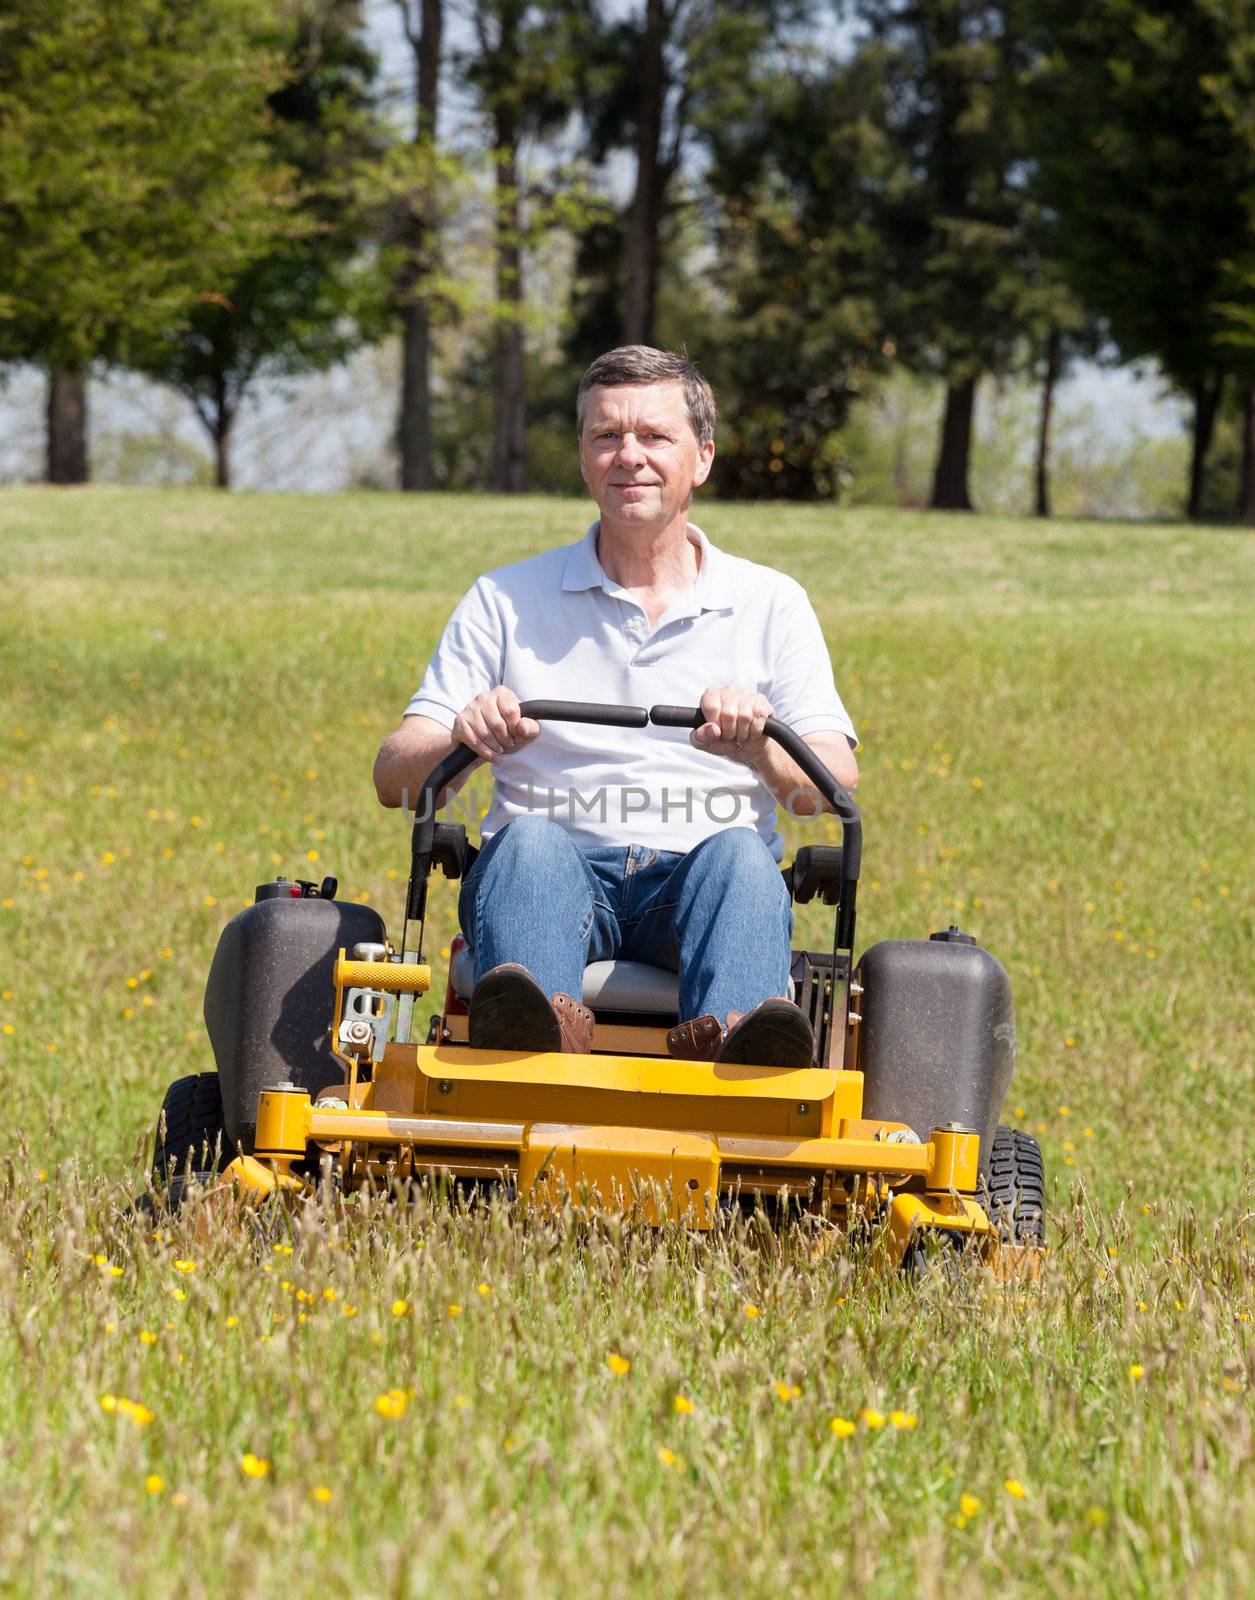 Senior retired male cutting the grass on expansive lawn using yellow zero-turn mower